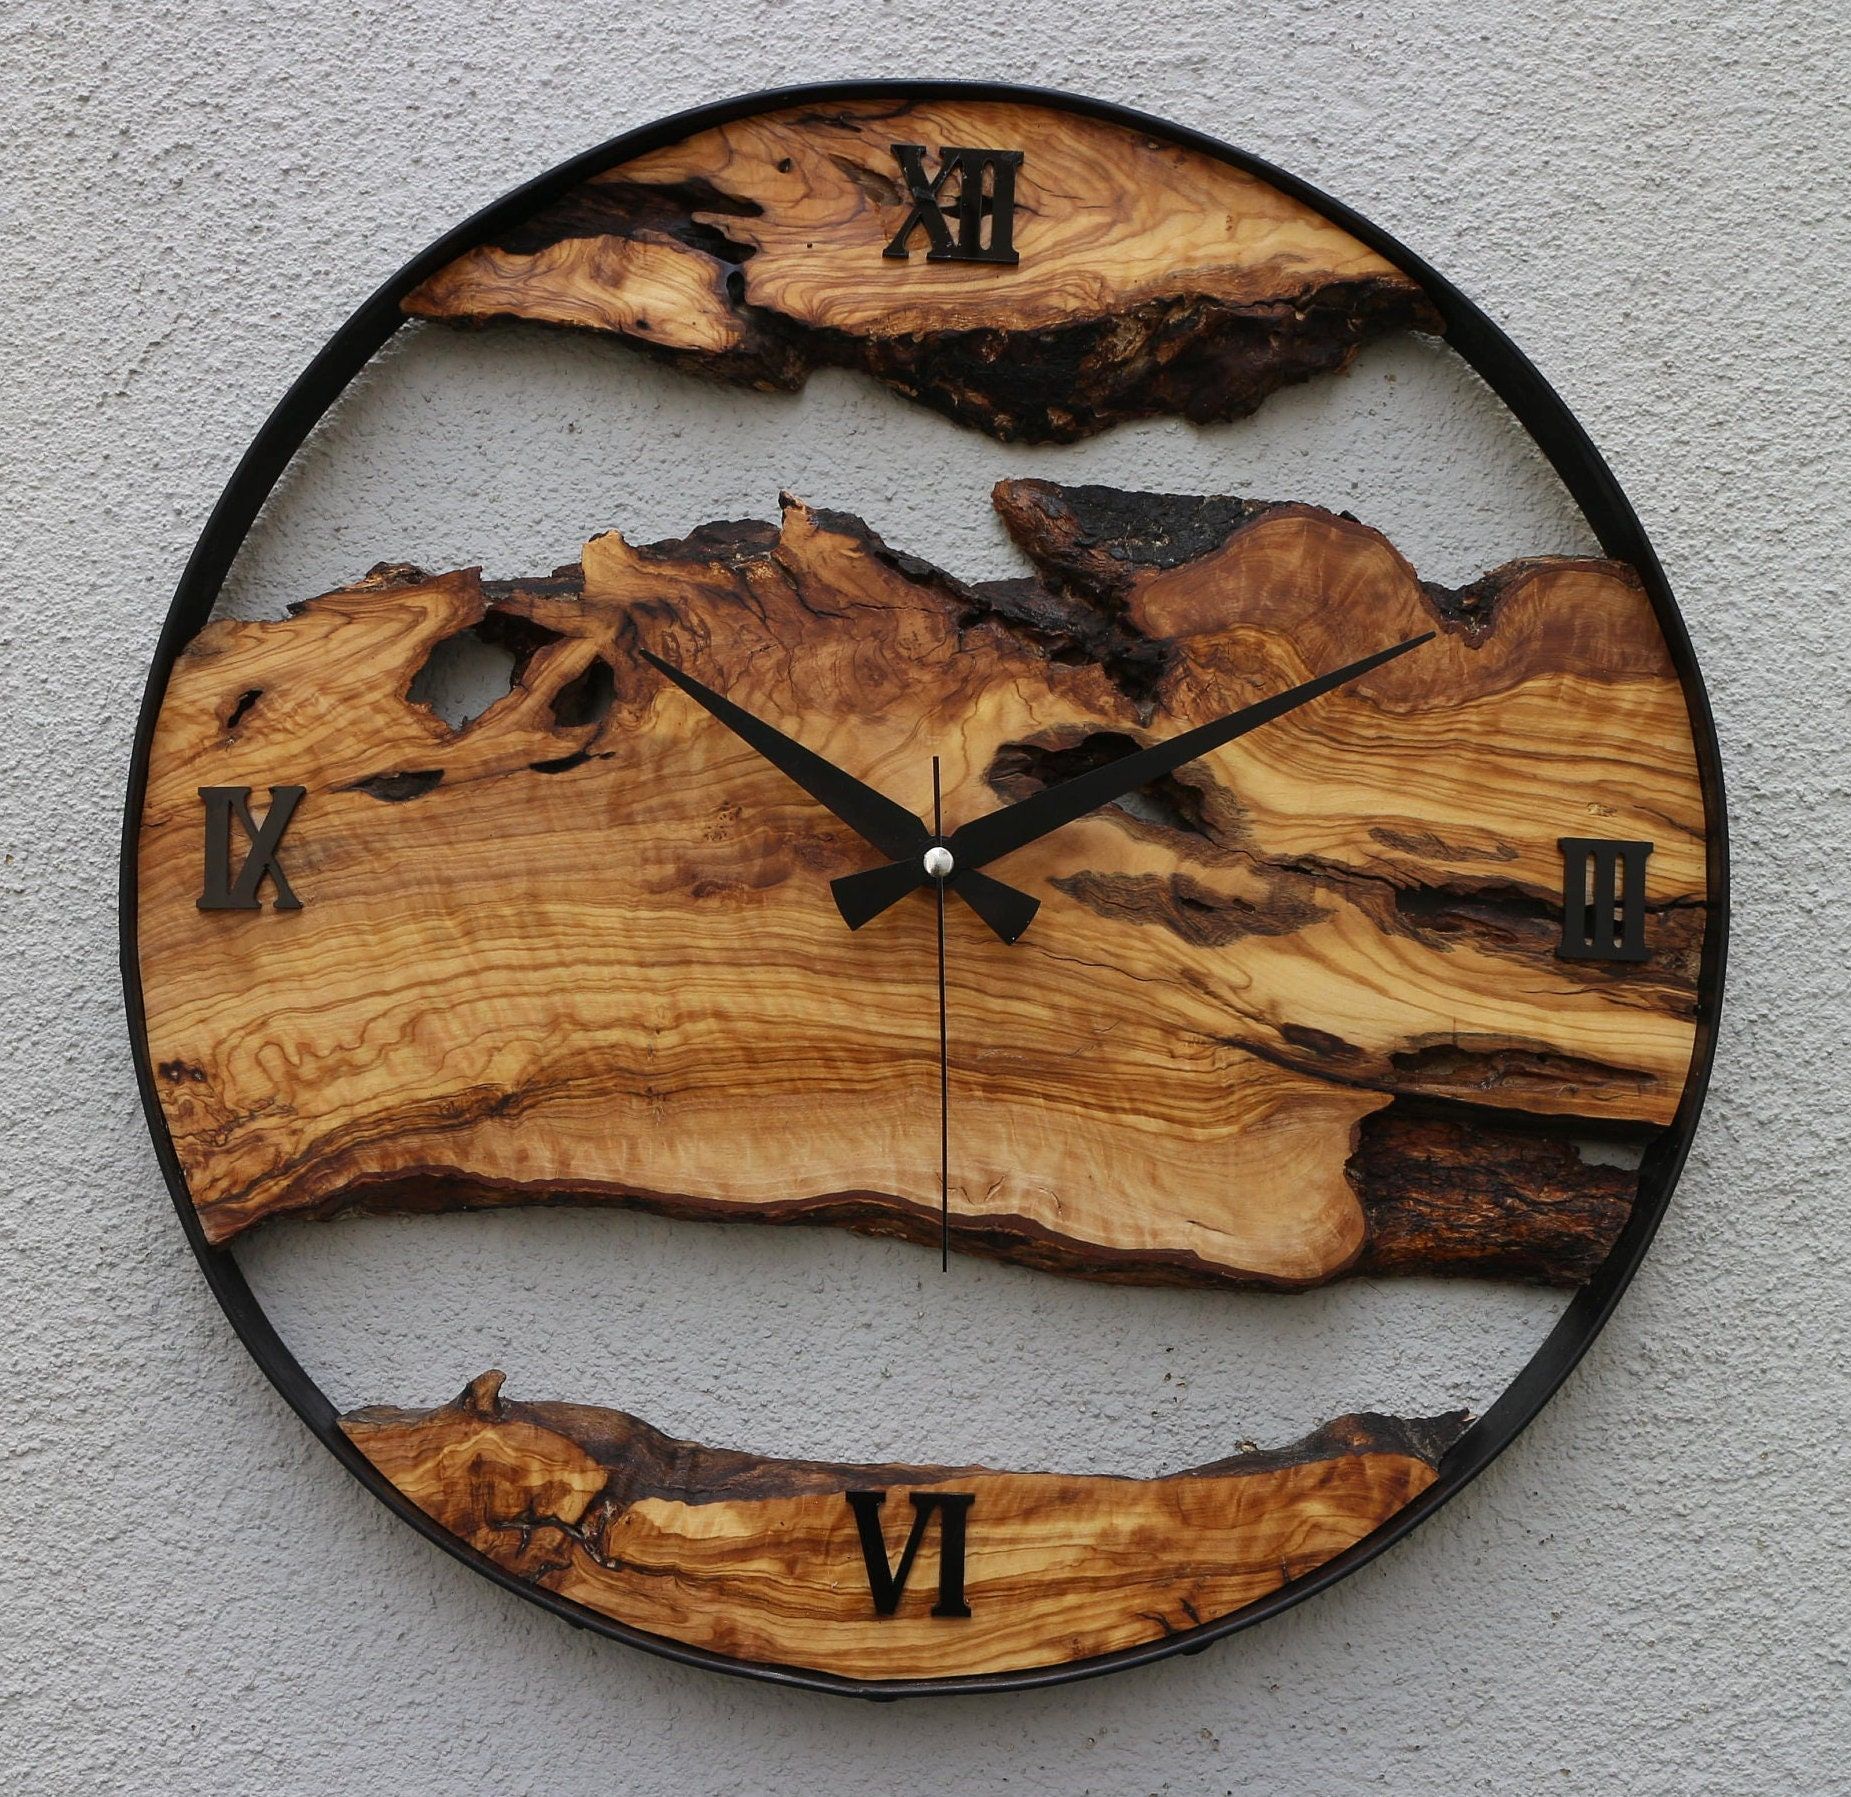 Rustic Charm: Add Character with Wooden Clocks